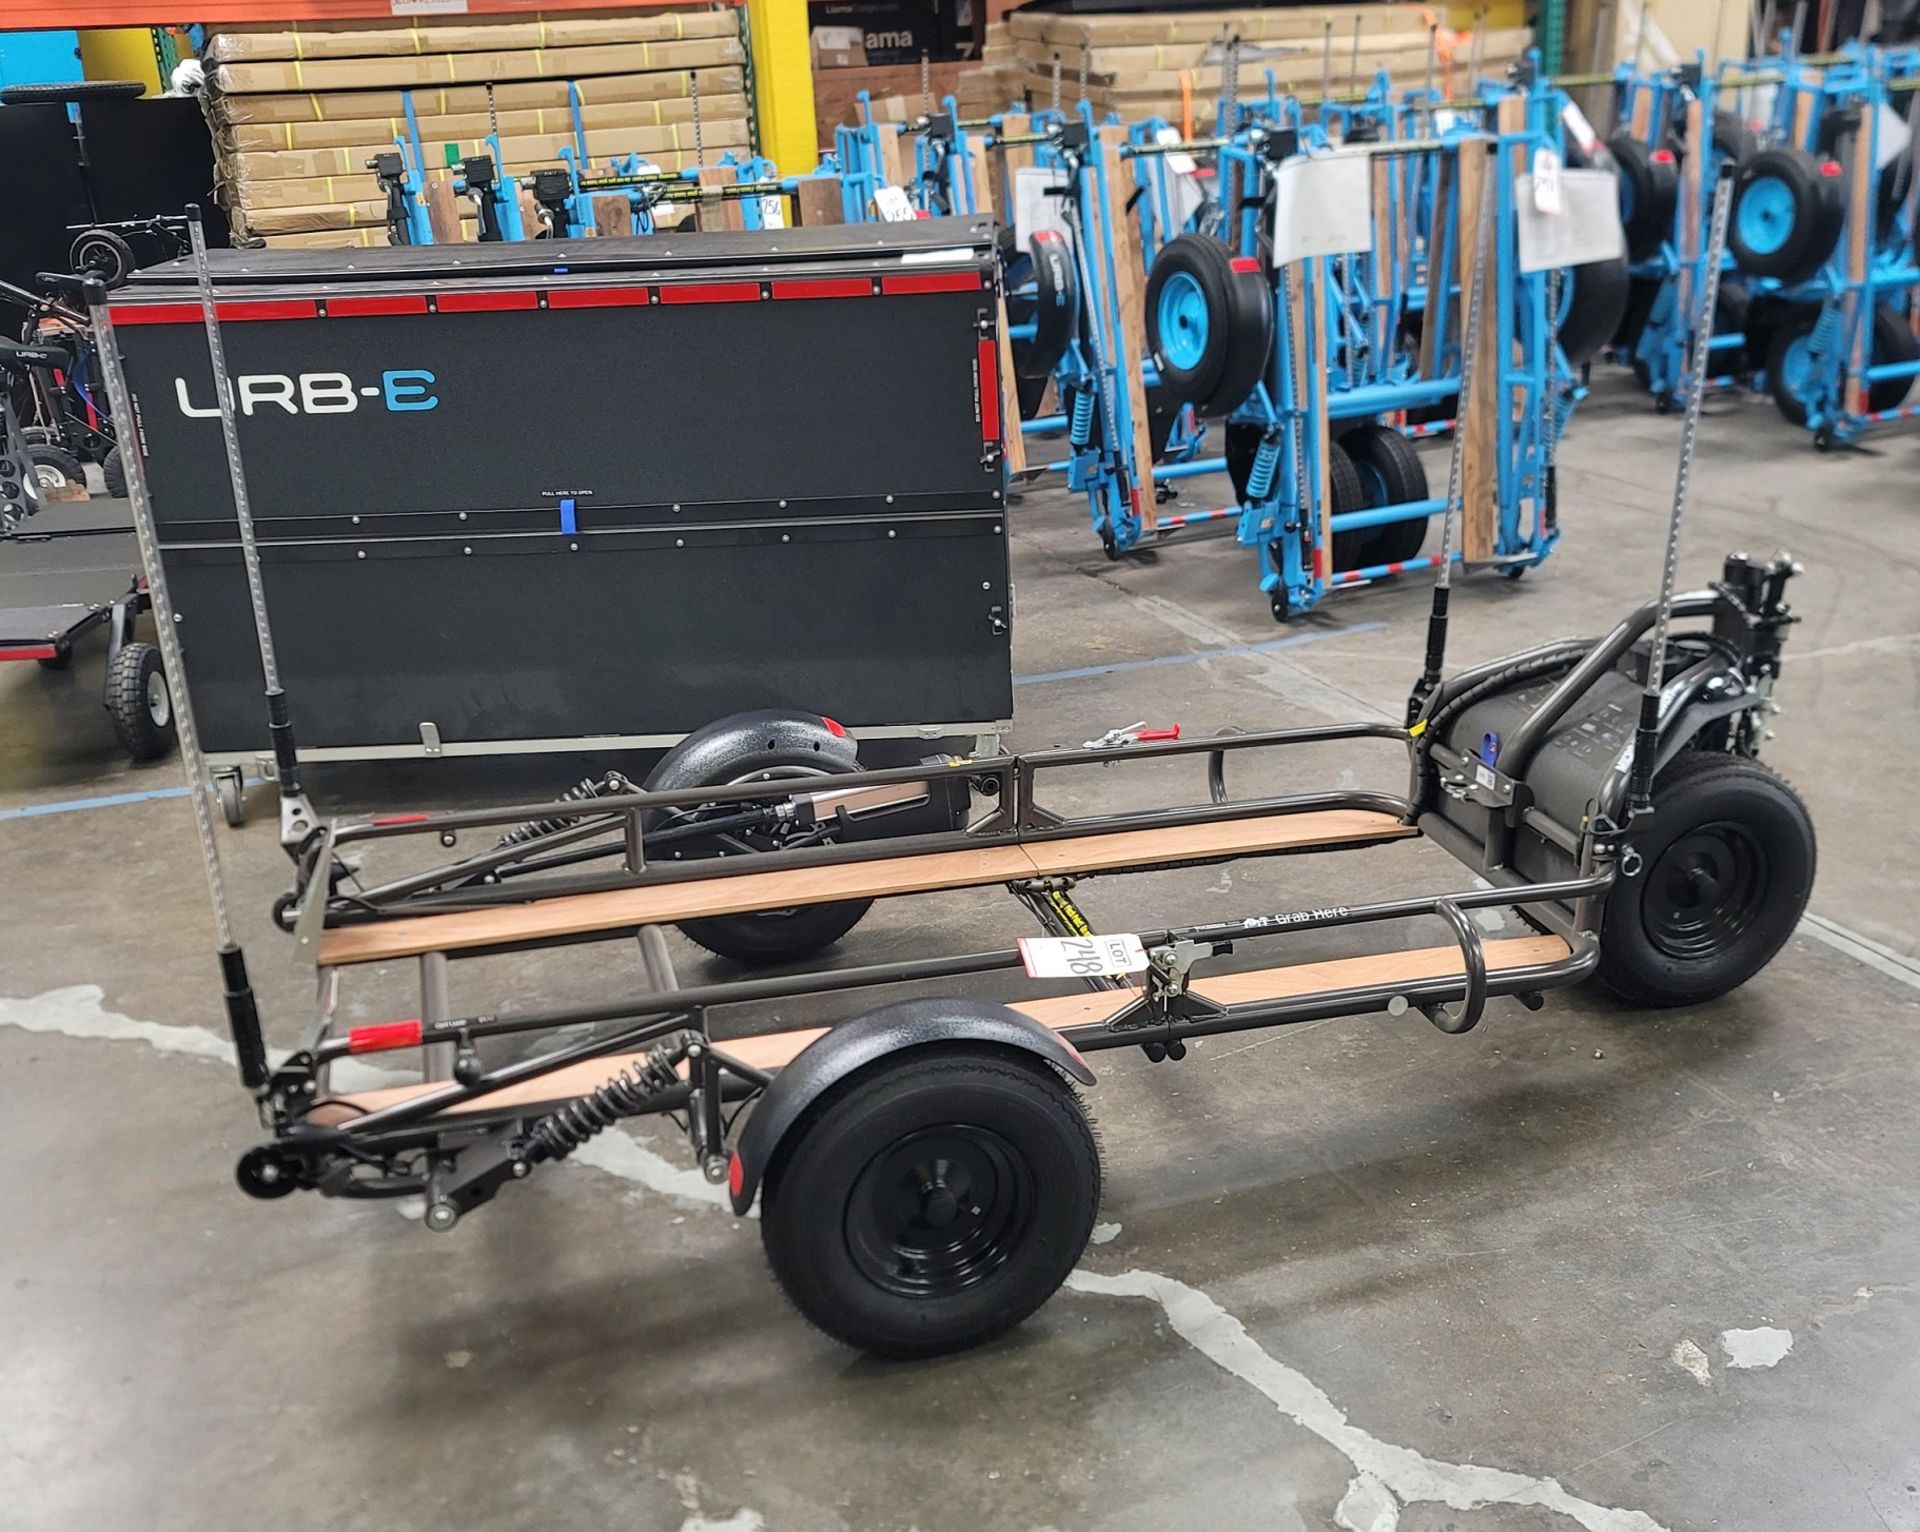 TOWABLE ROLL ON ROLL OFF TRAILER, W/ ELECTRIC LIFT, HYDRAULIC REAR BRAKES, COIL OVER SUSPENSION, - Image 2 of 4